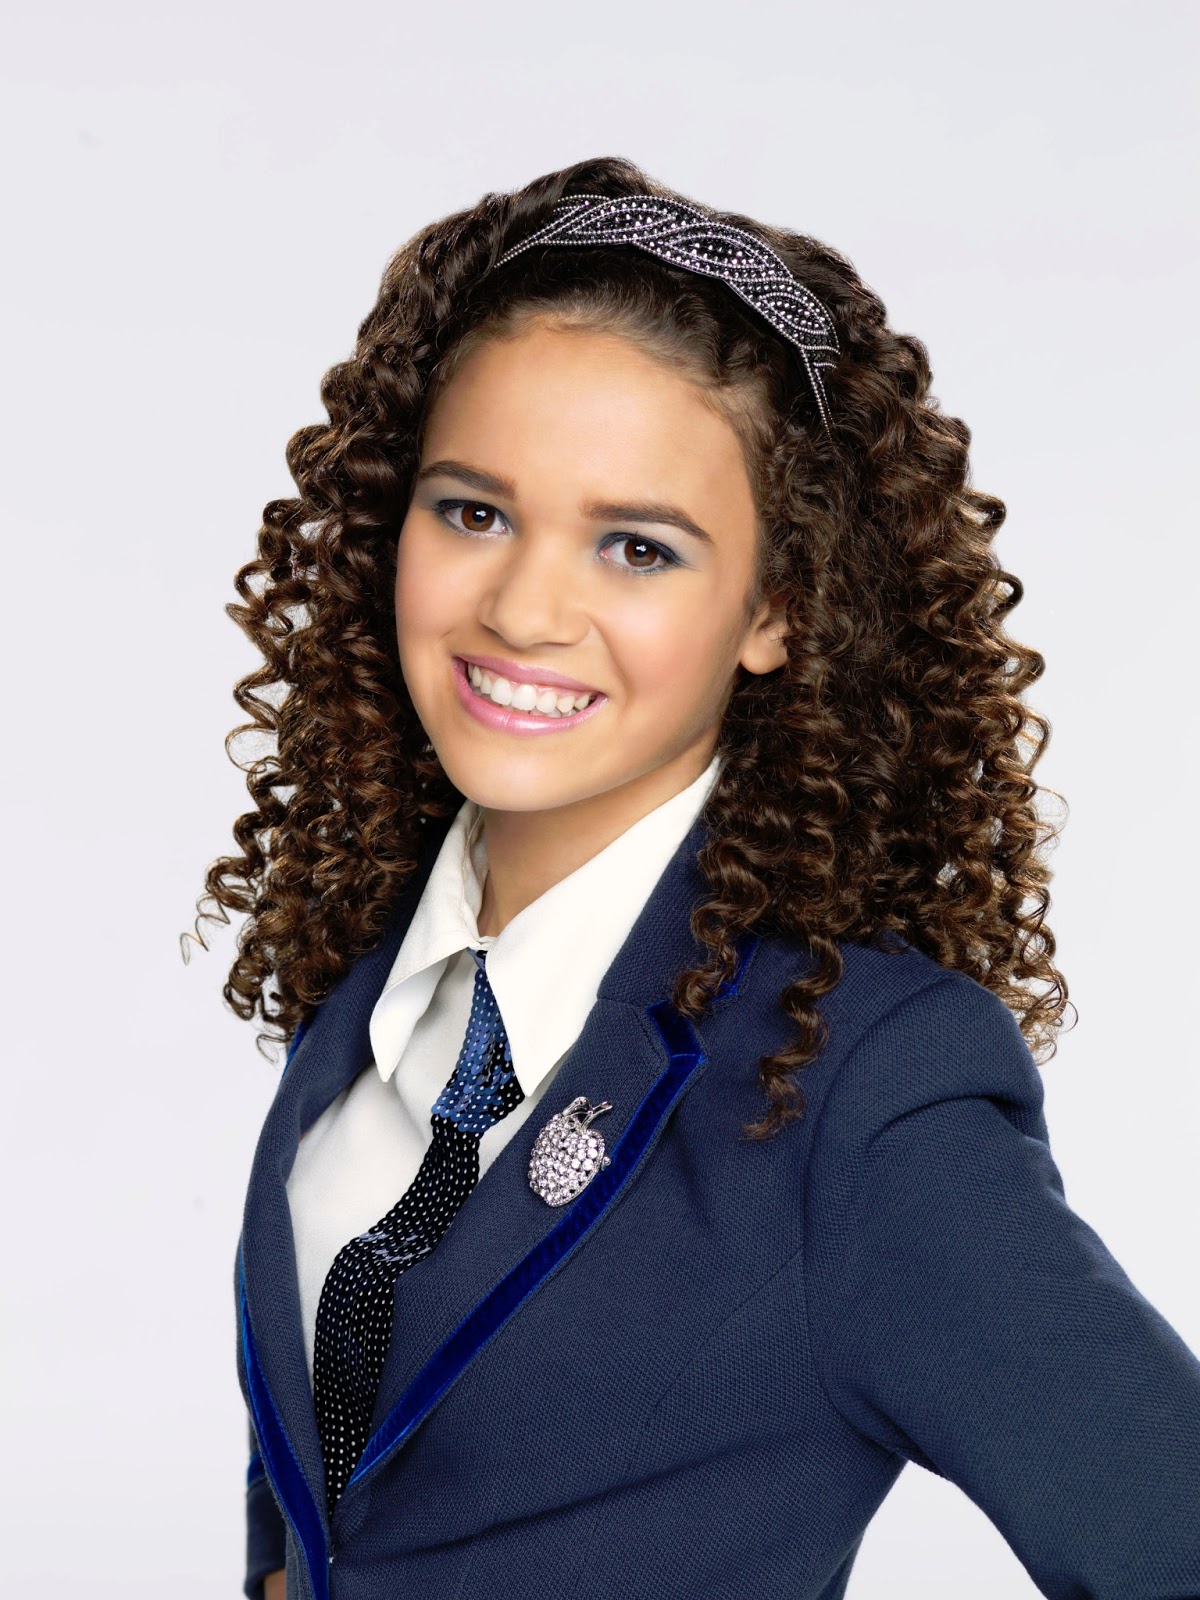 Madison Pettis in Life with Boys